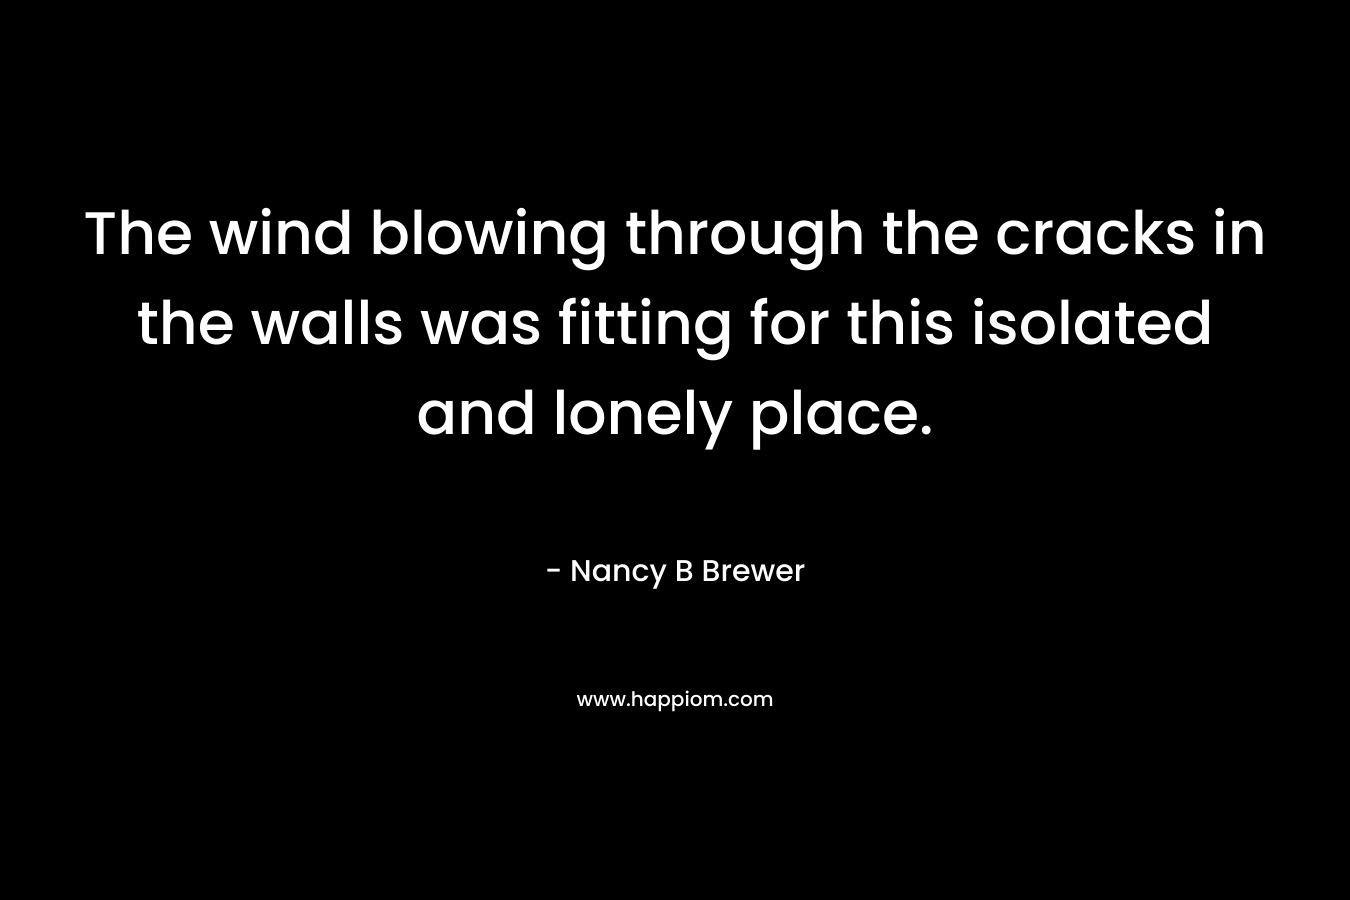 The wind blowing through the cracks in the walls was fitting for this isolated and lonely place. – Nancy B Brewer